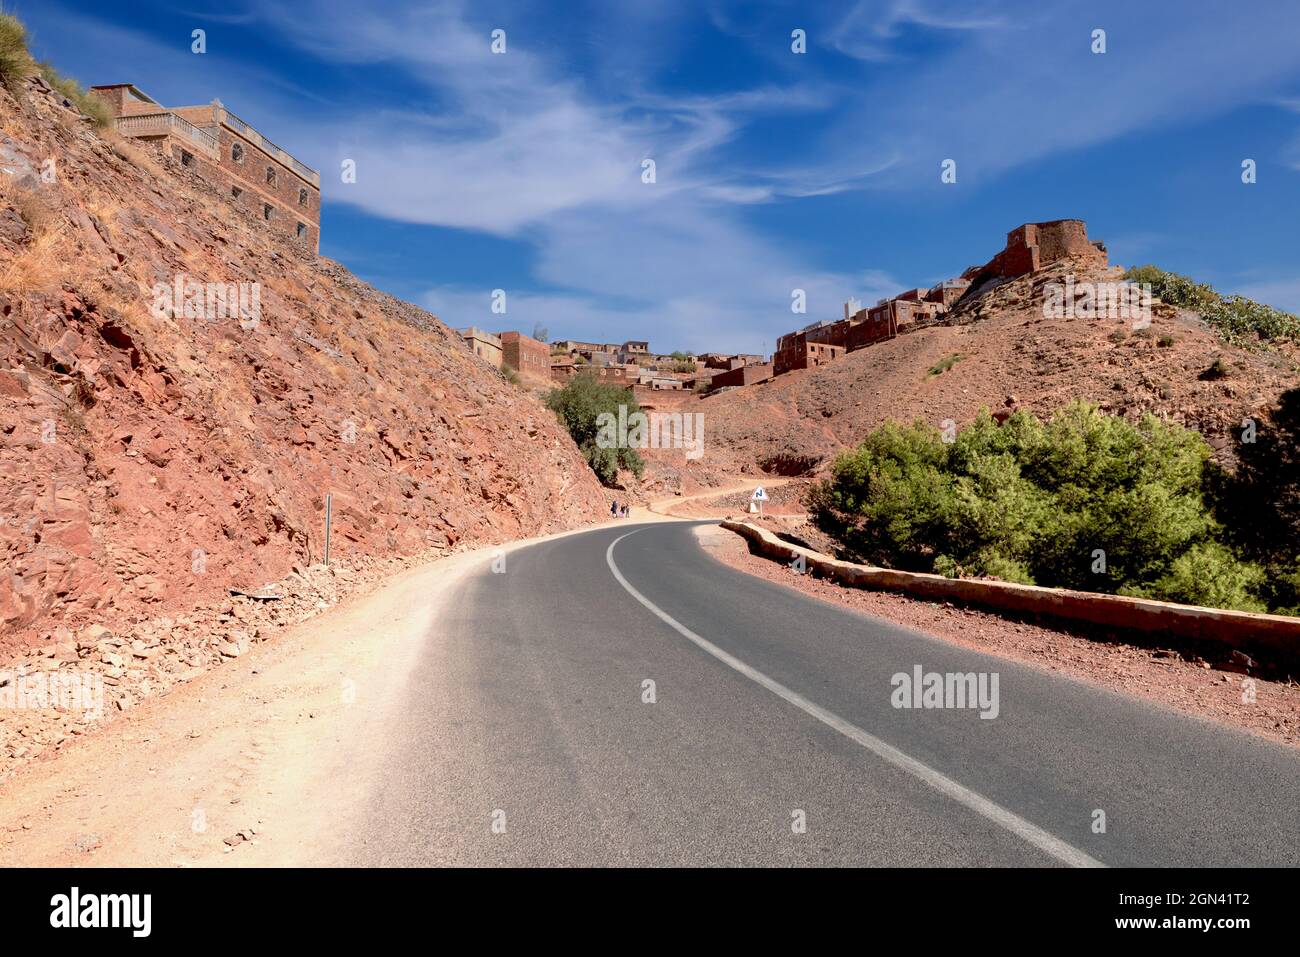 Canyon road from Agadir town towards Esaouira city in Morocco, Africa Stock Photo